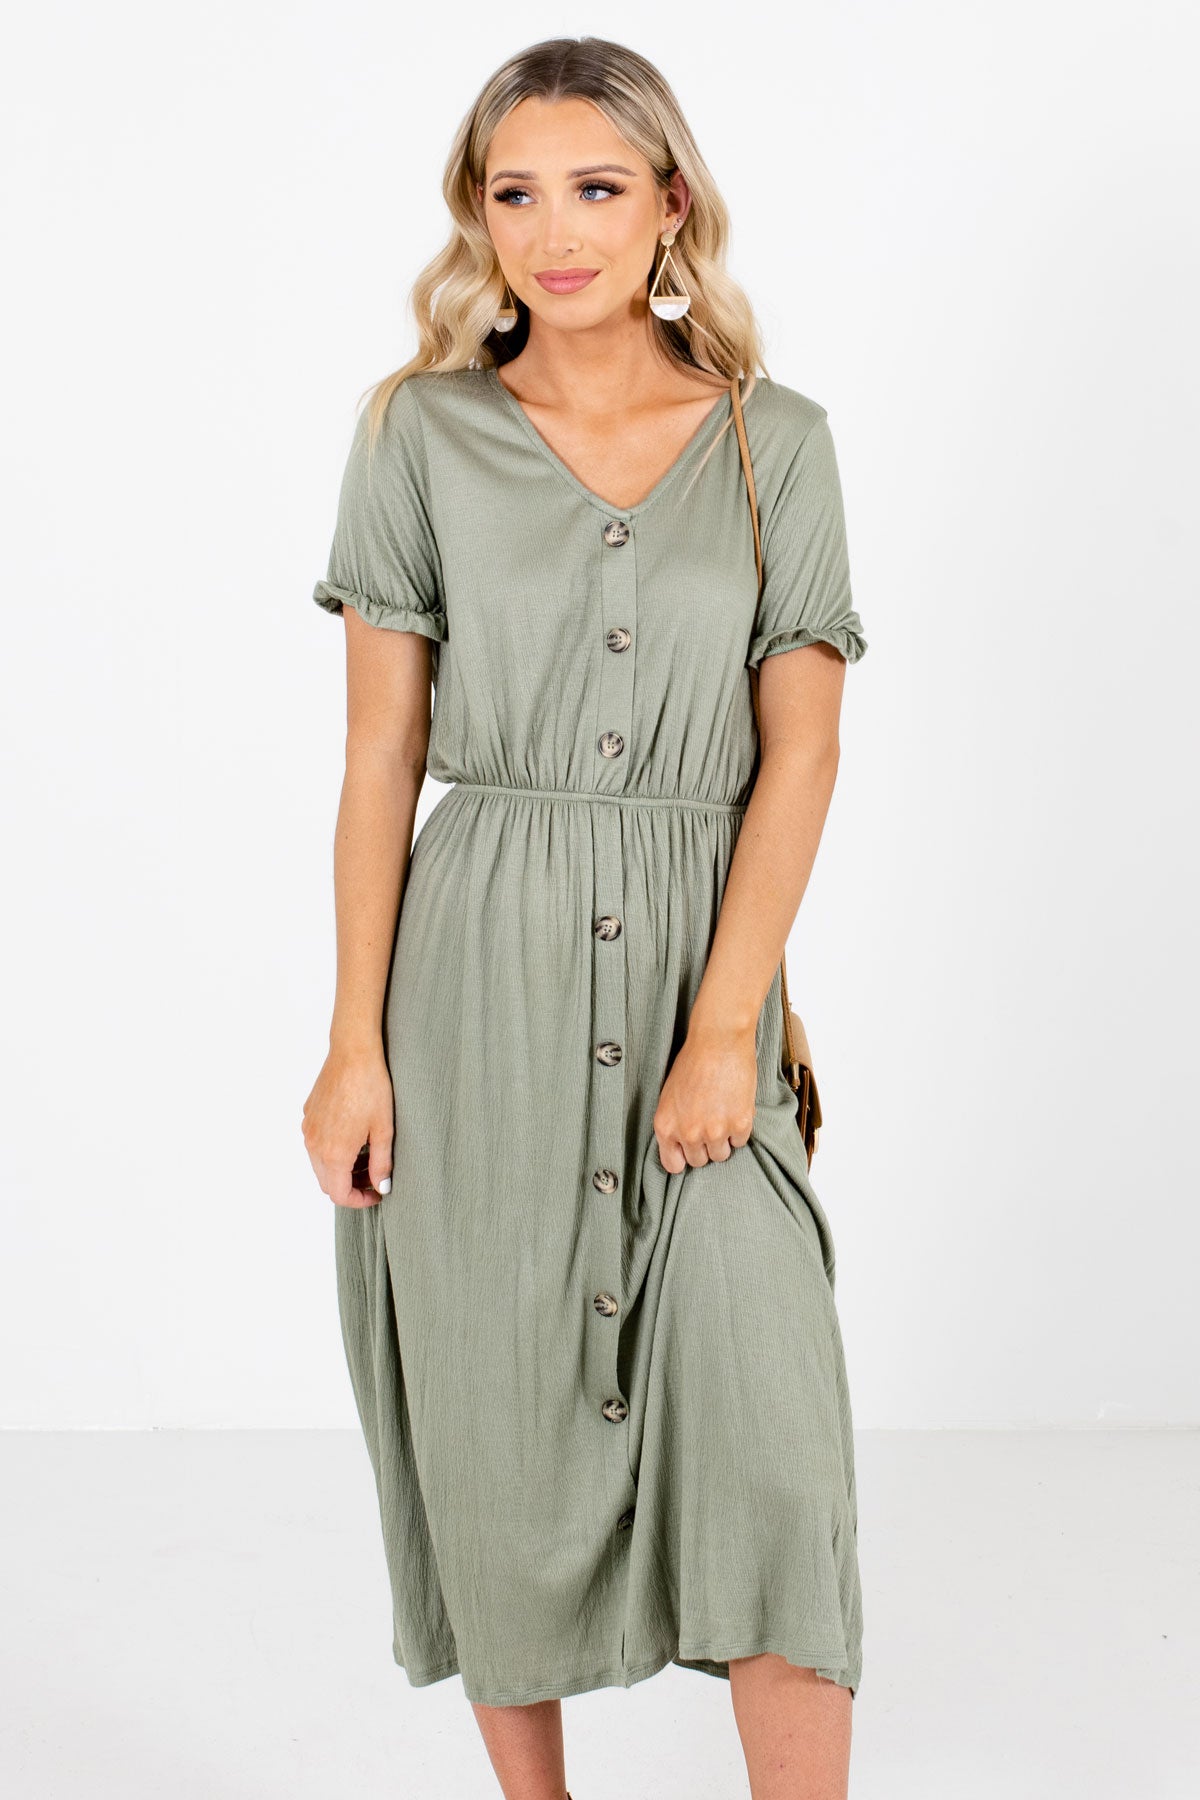 Olive Green Midi Length Boutique Dresses for Women